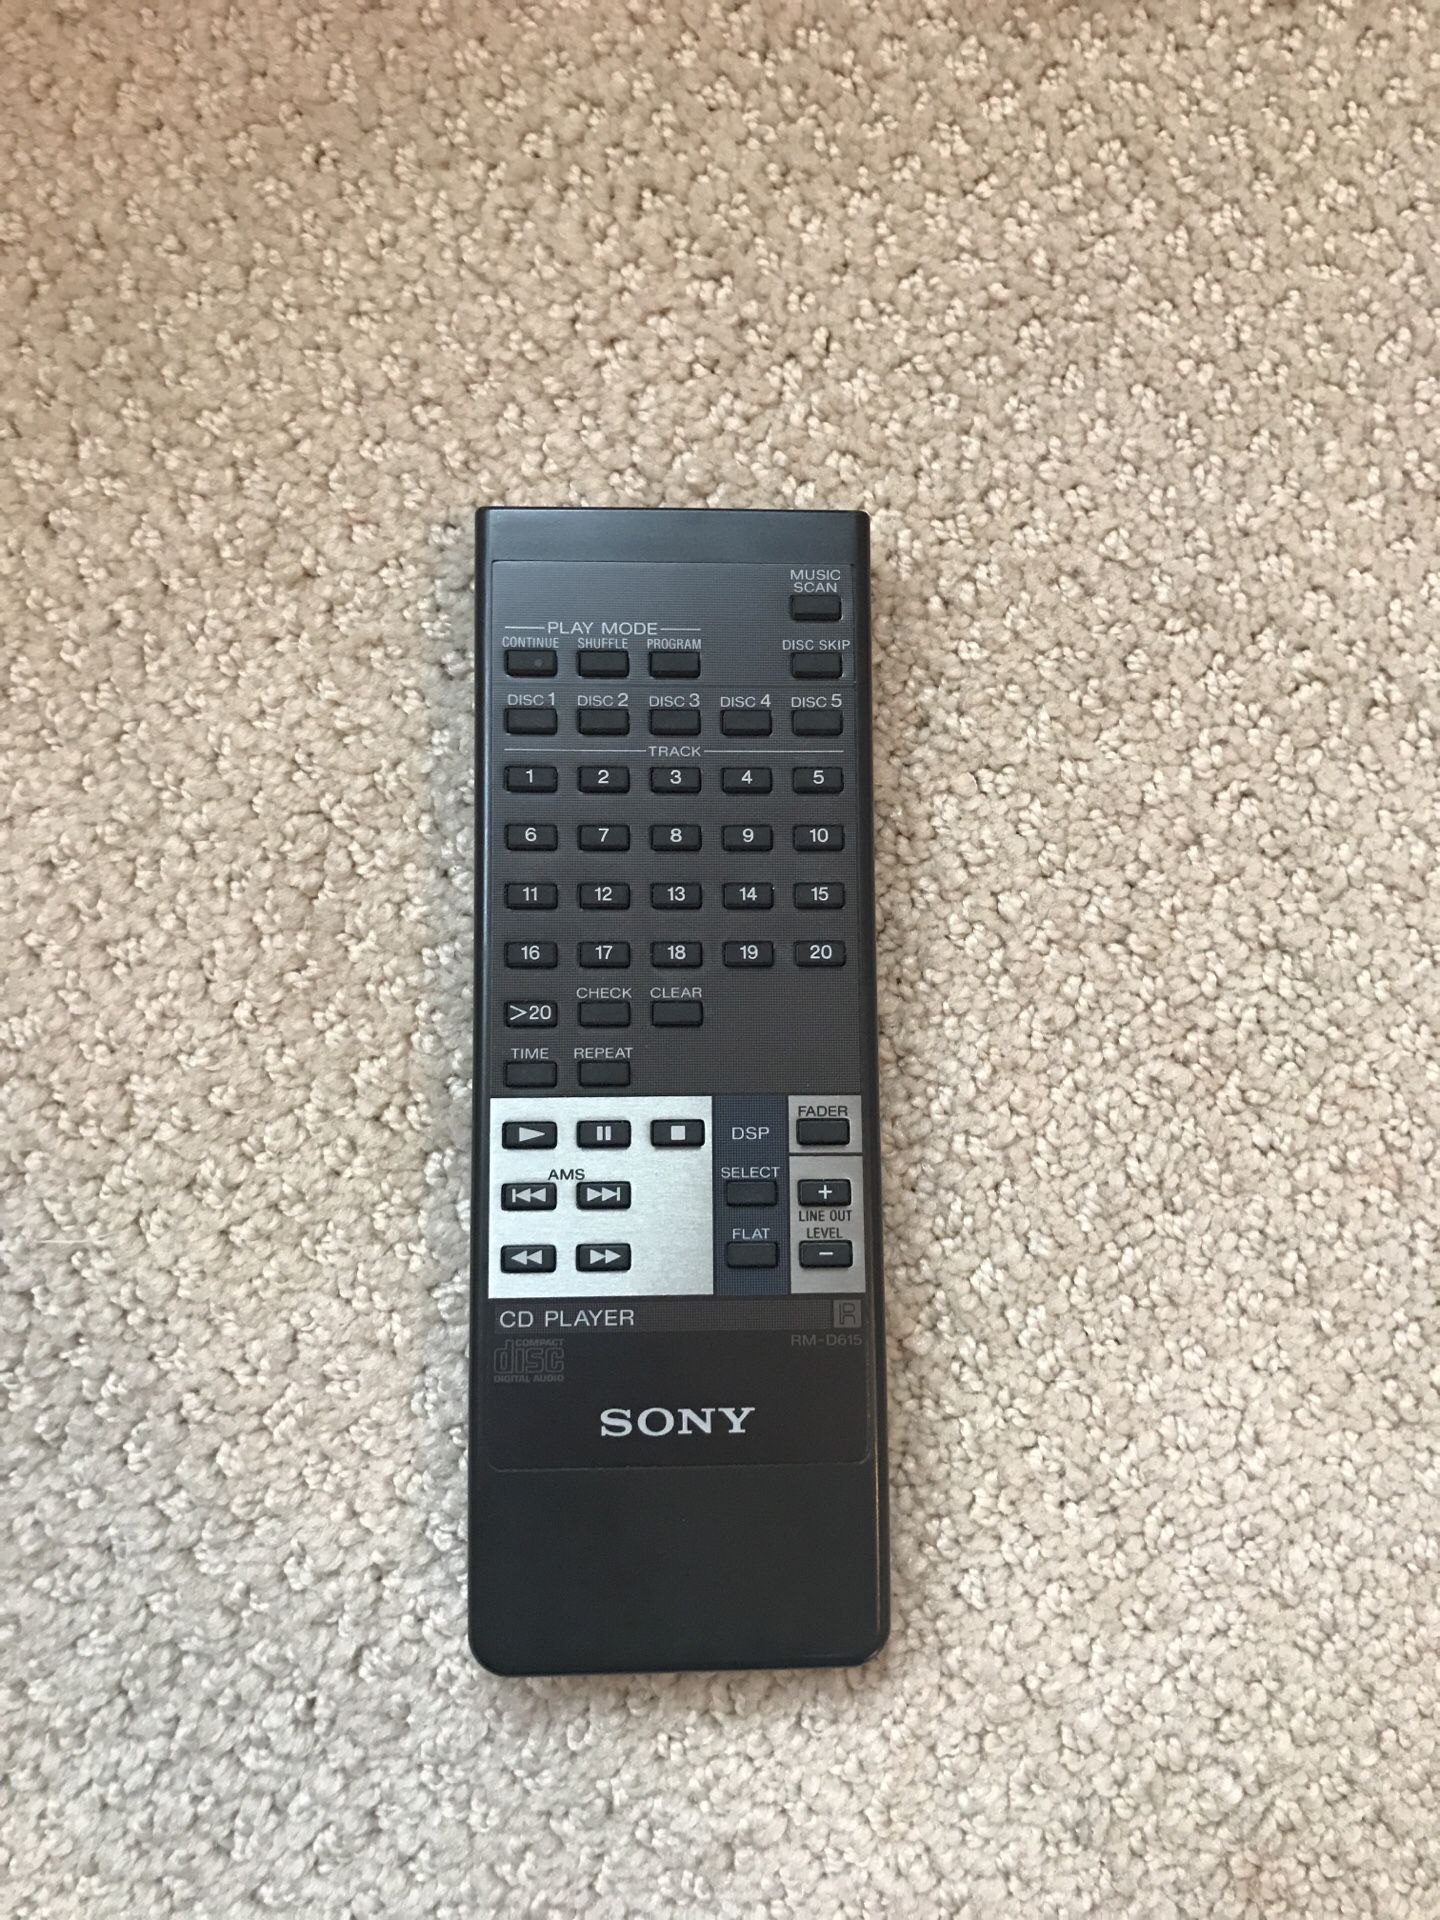 SONY CD player remote control